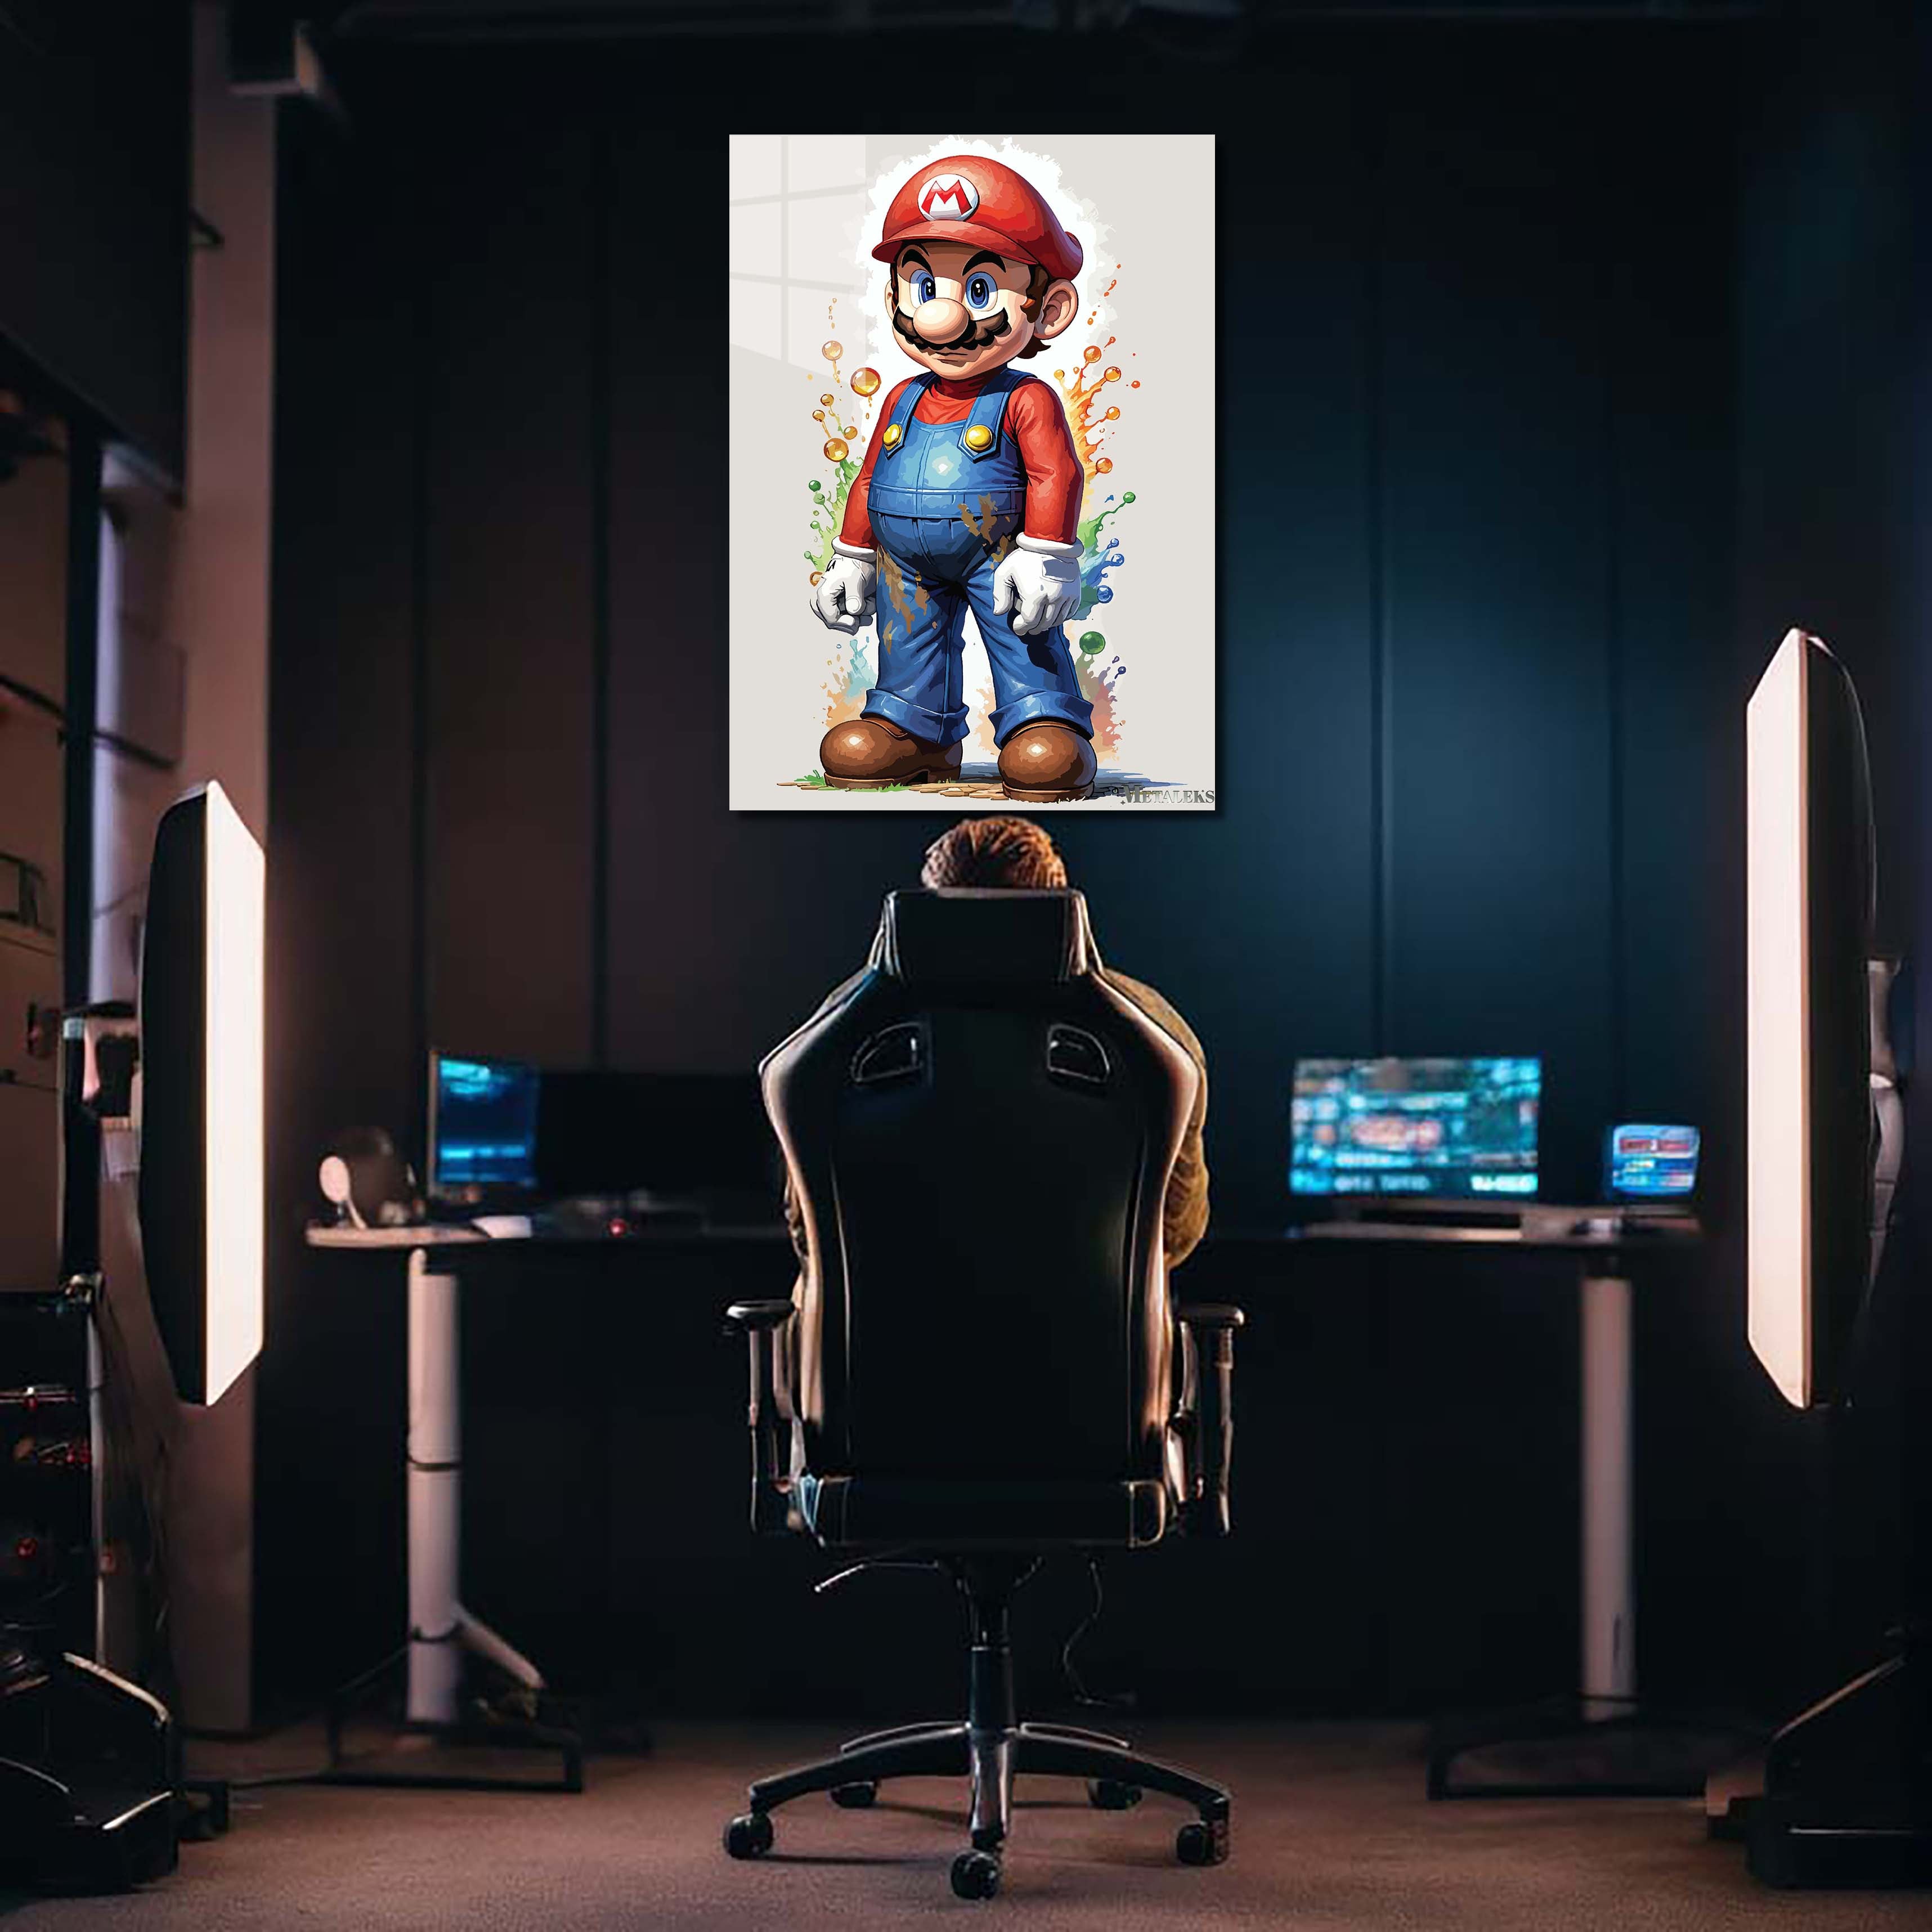 Mario on Art-designed by @Grafity Artistry